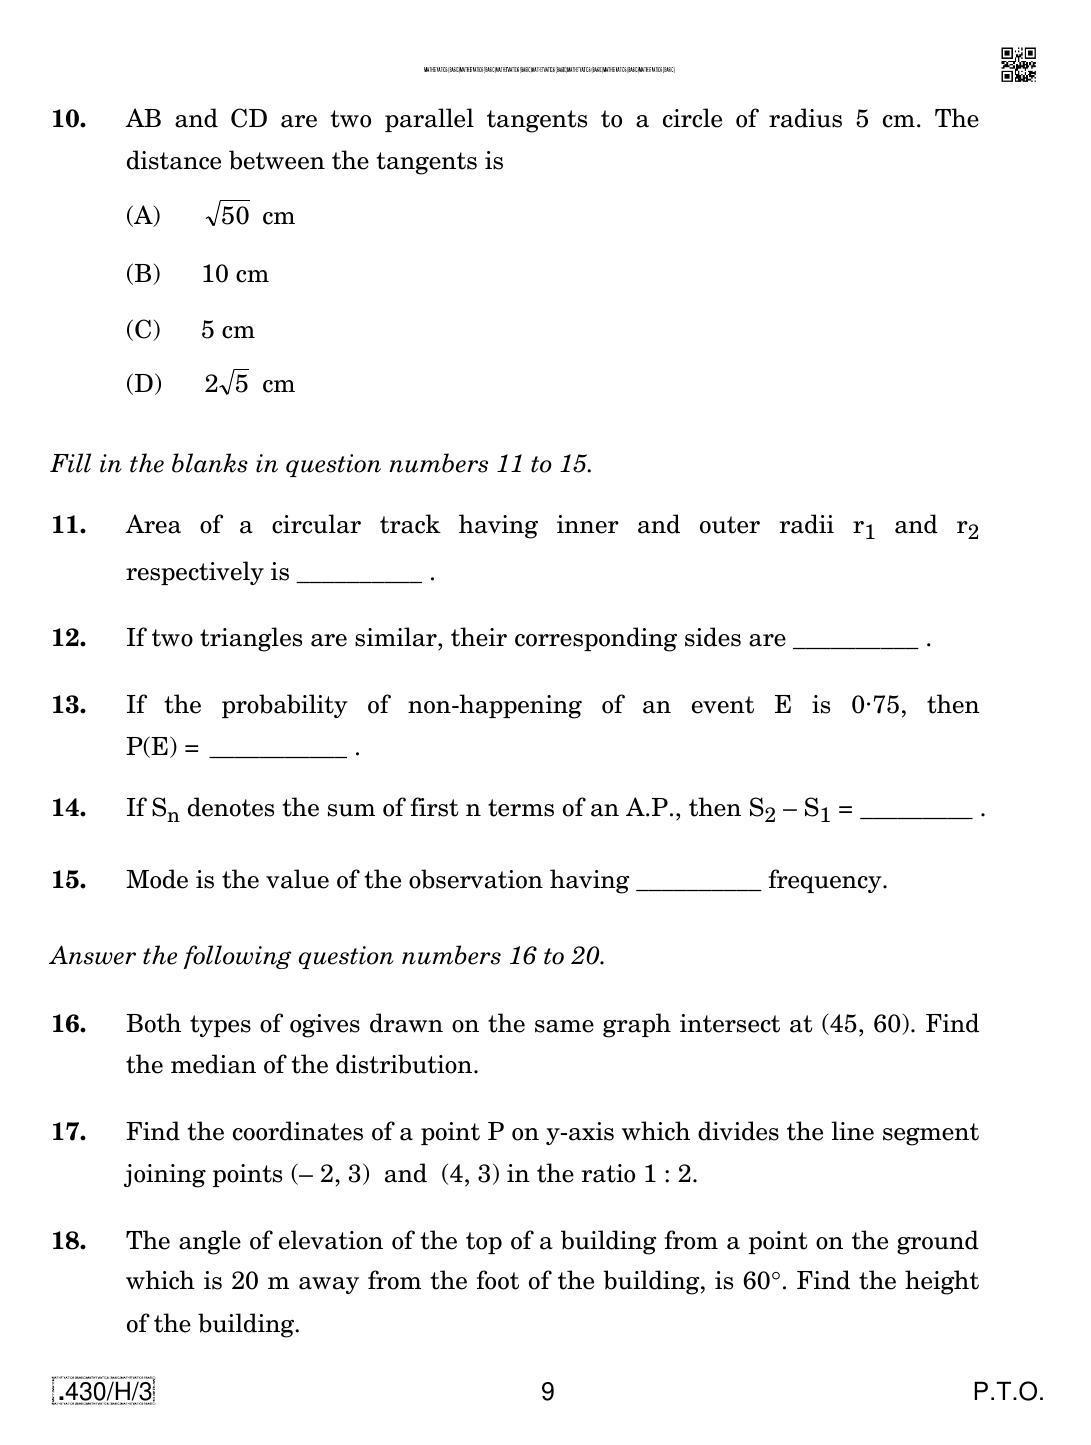 CBSE Class 10 430-C-3 - Maths (Basic) 2020 Compartment Question Paper - Page 9